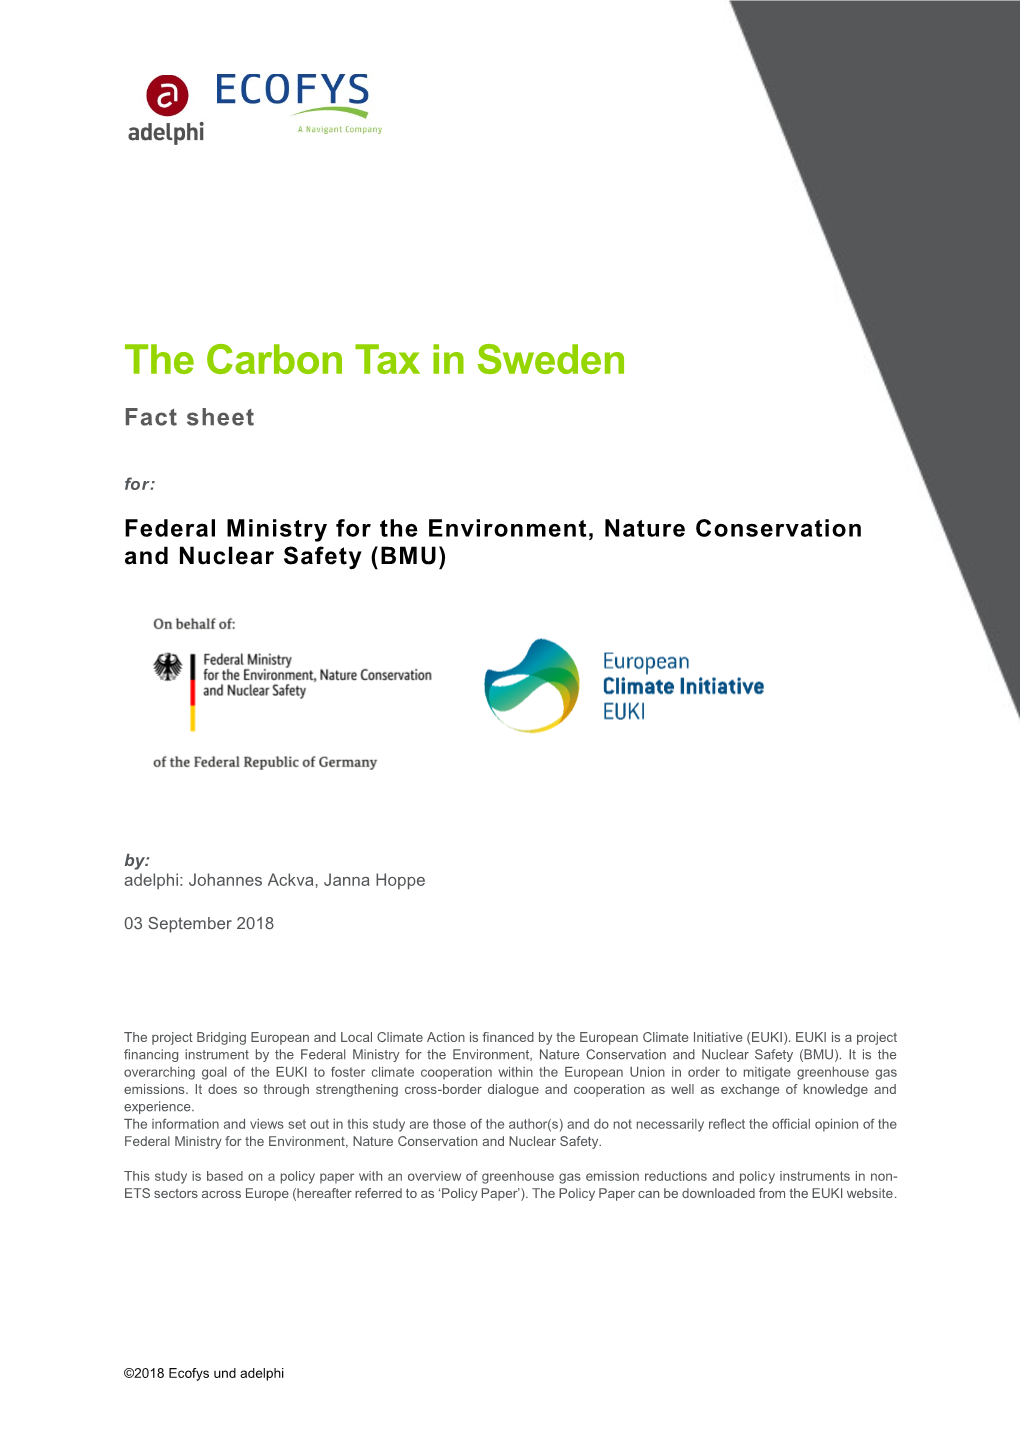 The Carbon Tax in Sweden Fact Sheet